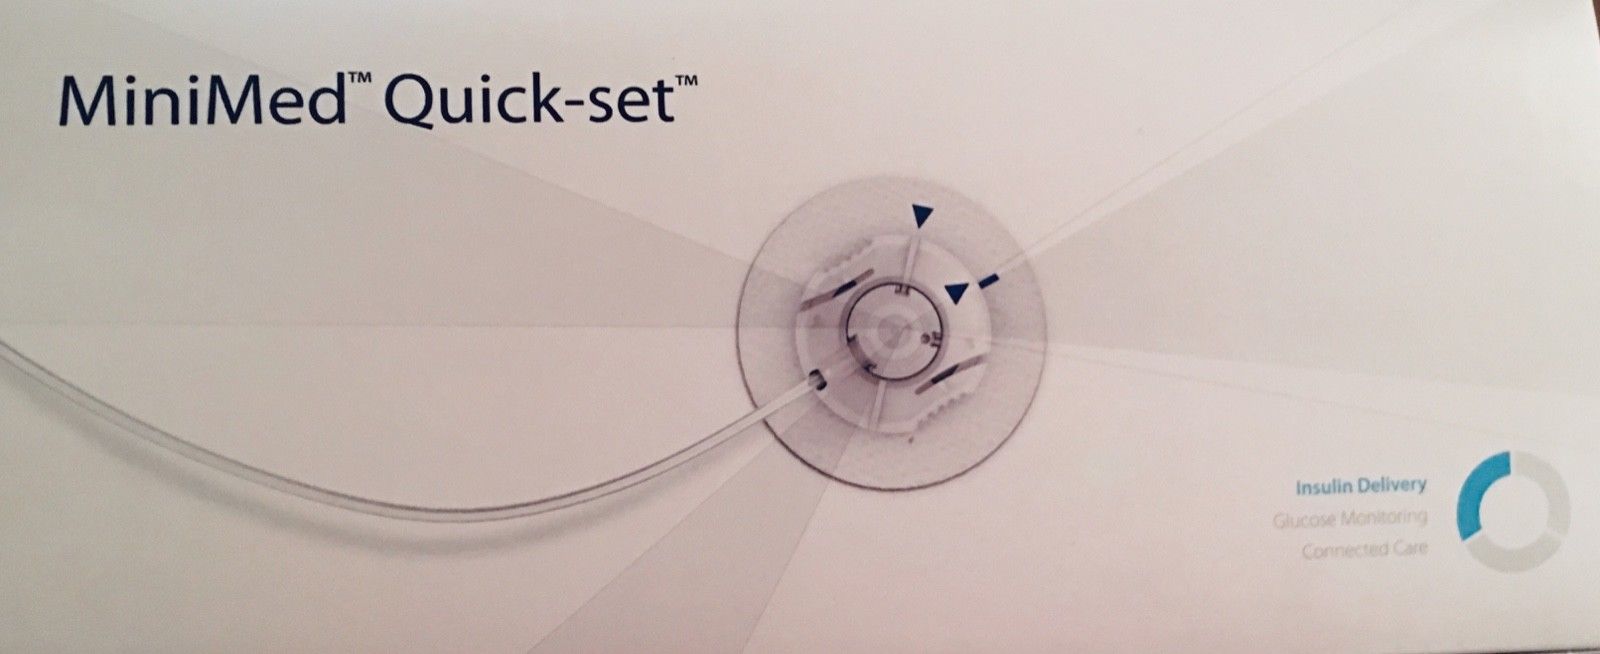 New Sealed Boxes Medtronic MINIMED QUICKSET with various exp dates in 2019.